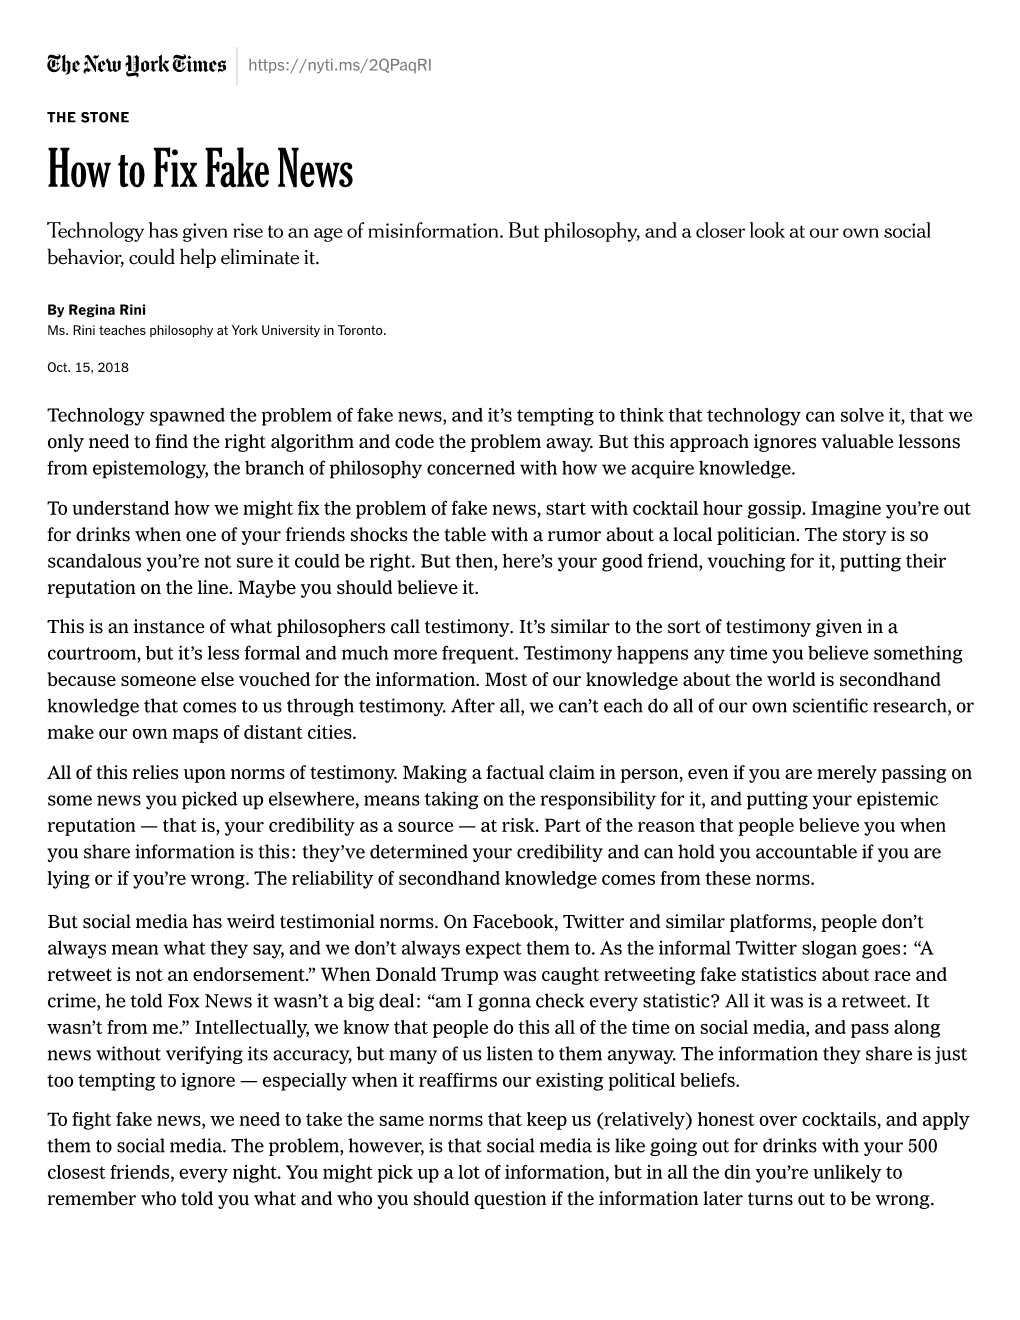 How to Fix Fake News Technology Has Given Rise to an Age of Misinformation